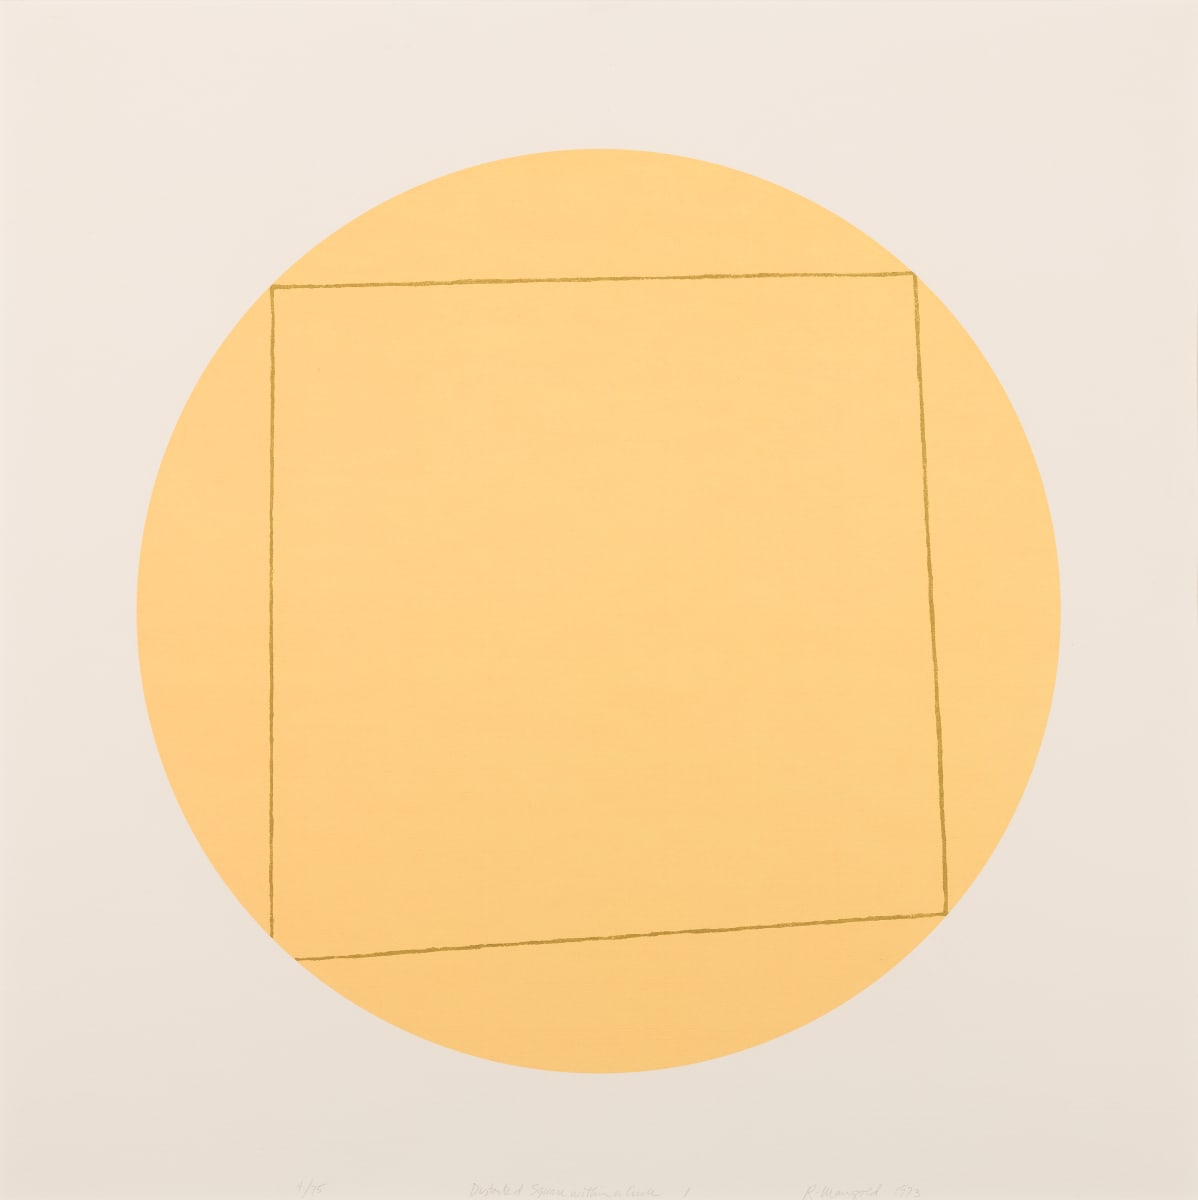 1, from Distorted Square Within a Circle by Robert Mangold 